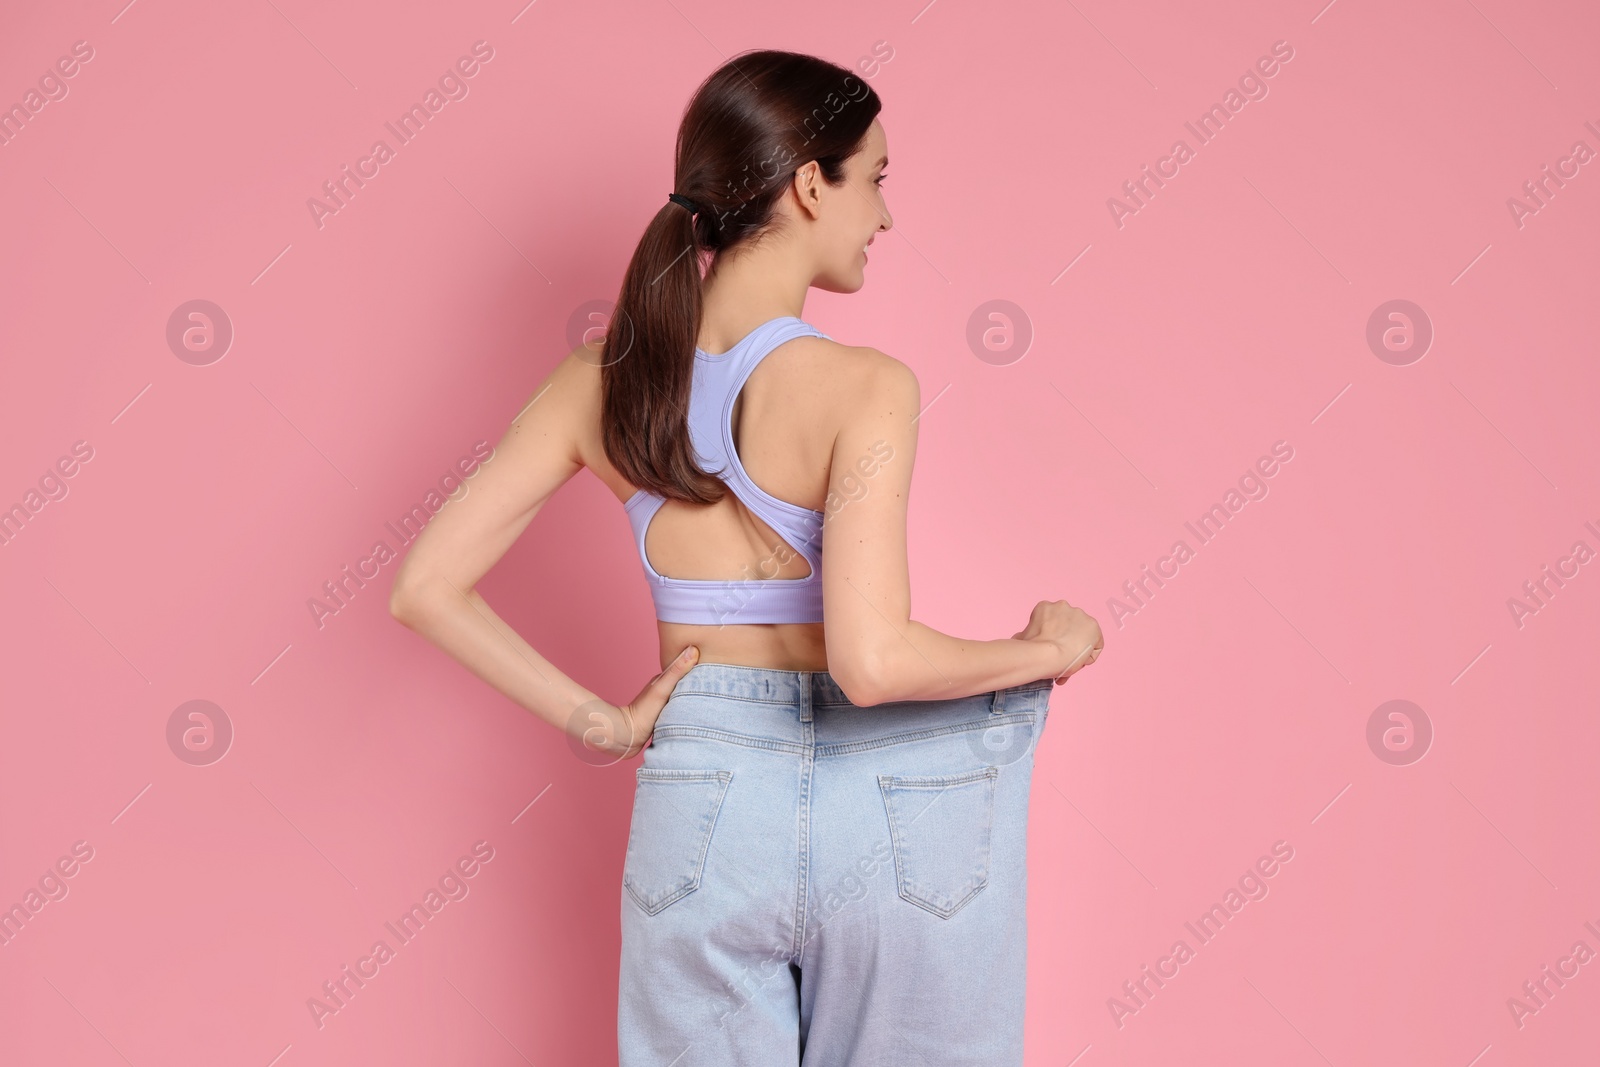 Photo of Woman in big jeans showing her slim body on pink background, back view